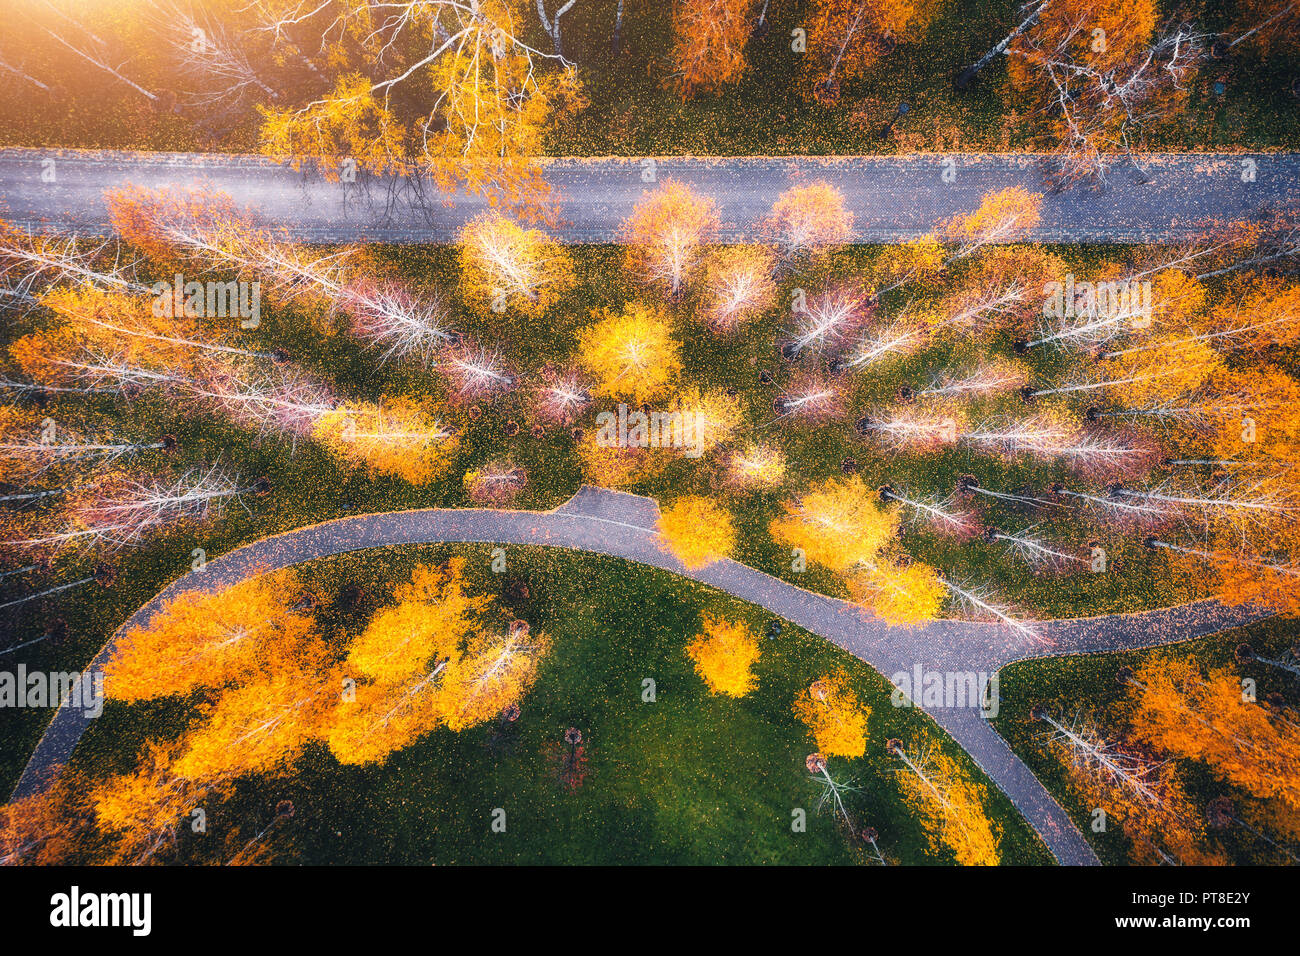 Aerial view of amazing autumn park in europe in the evening. Landscape with trees with yellow leaves, field with green grass and paths in fall. Scener Stock Photo